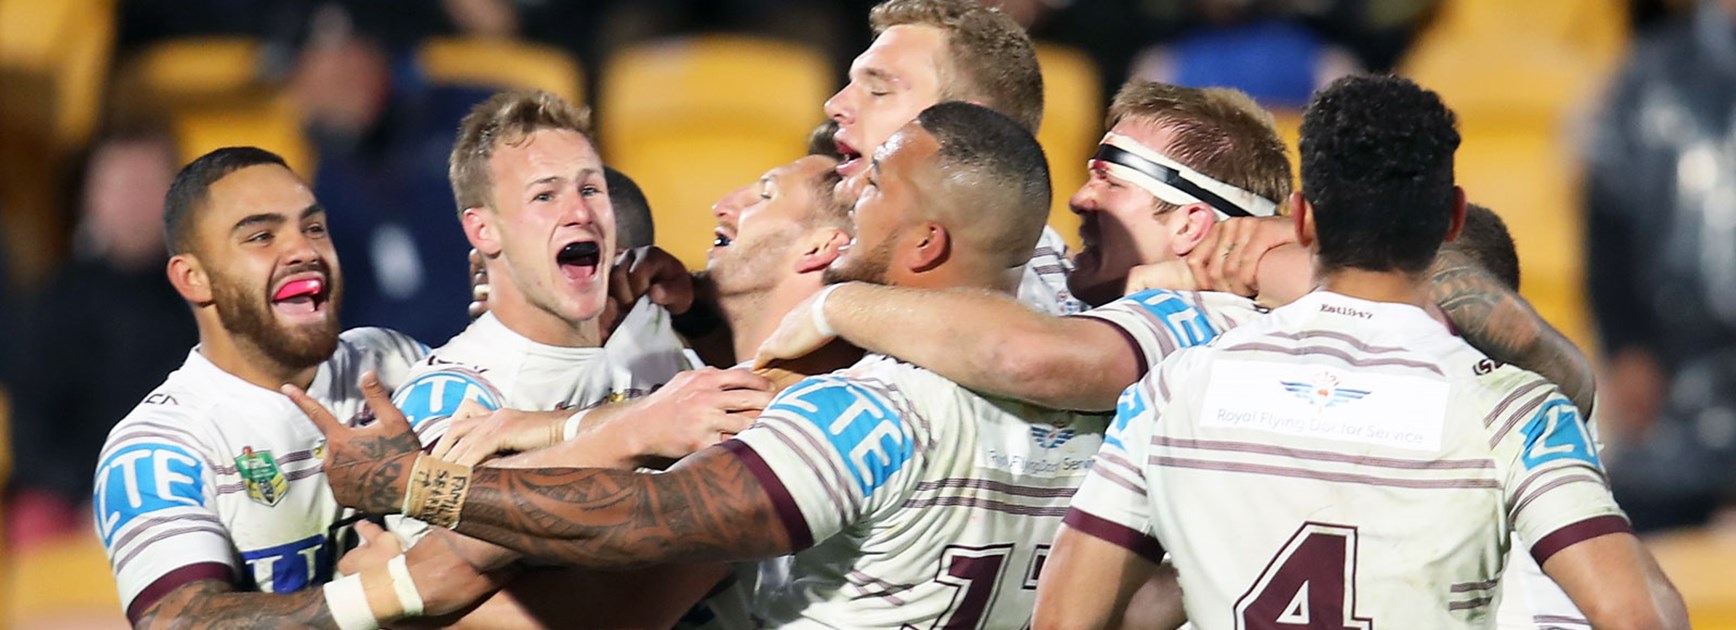 Sea Eagles players celebrate their dramatic win over the Warriors.